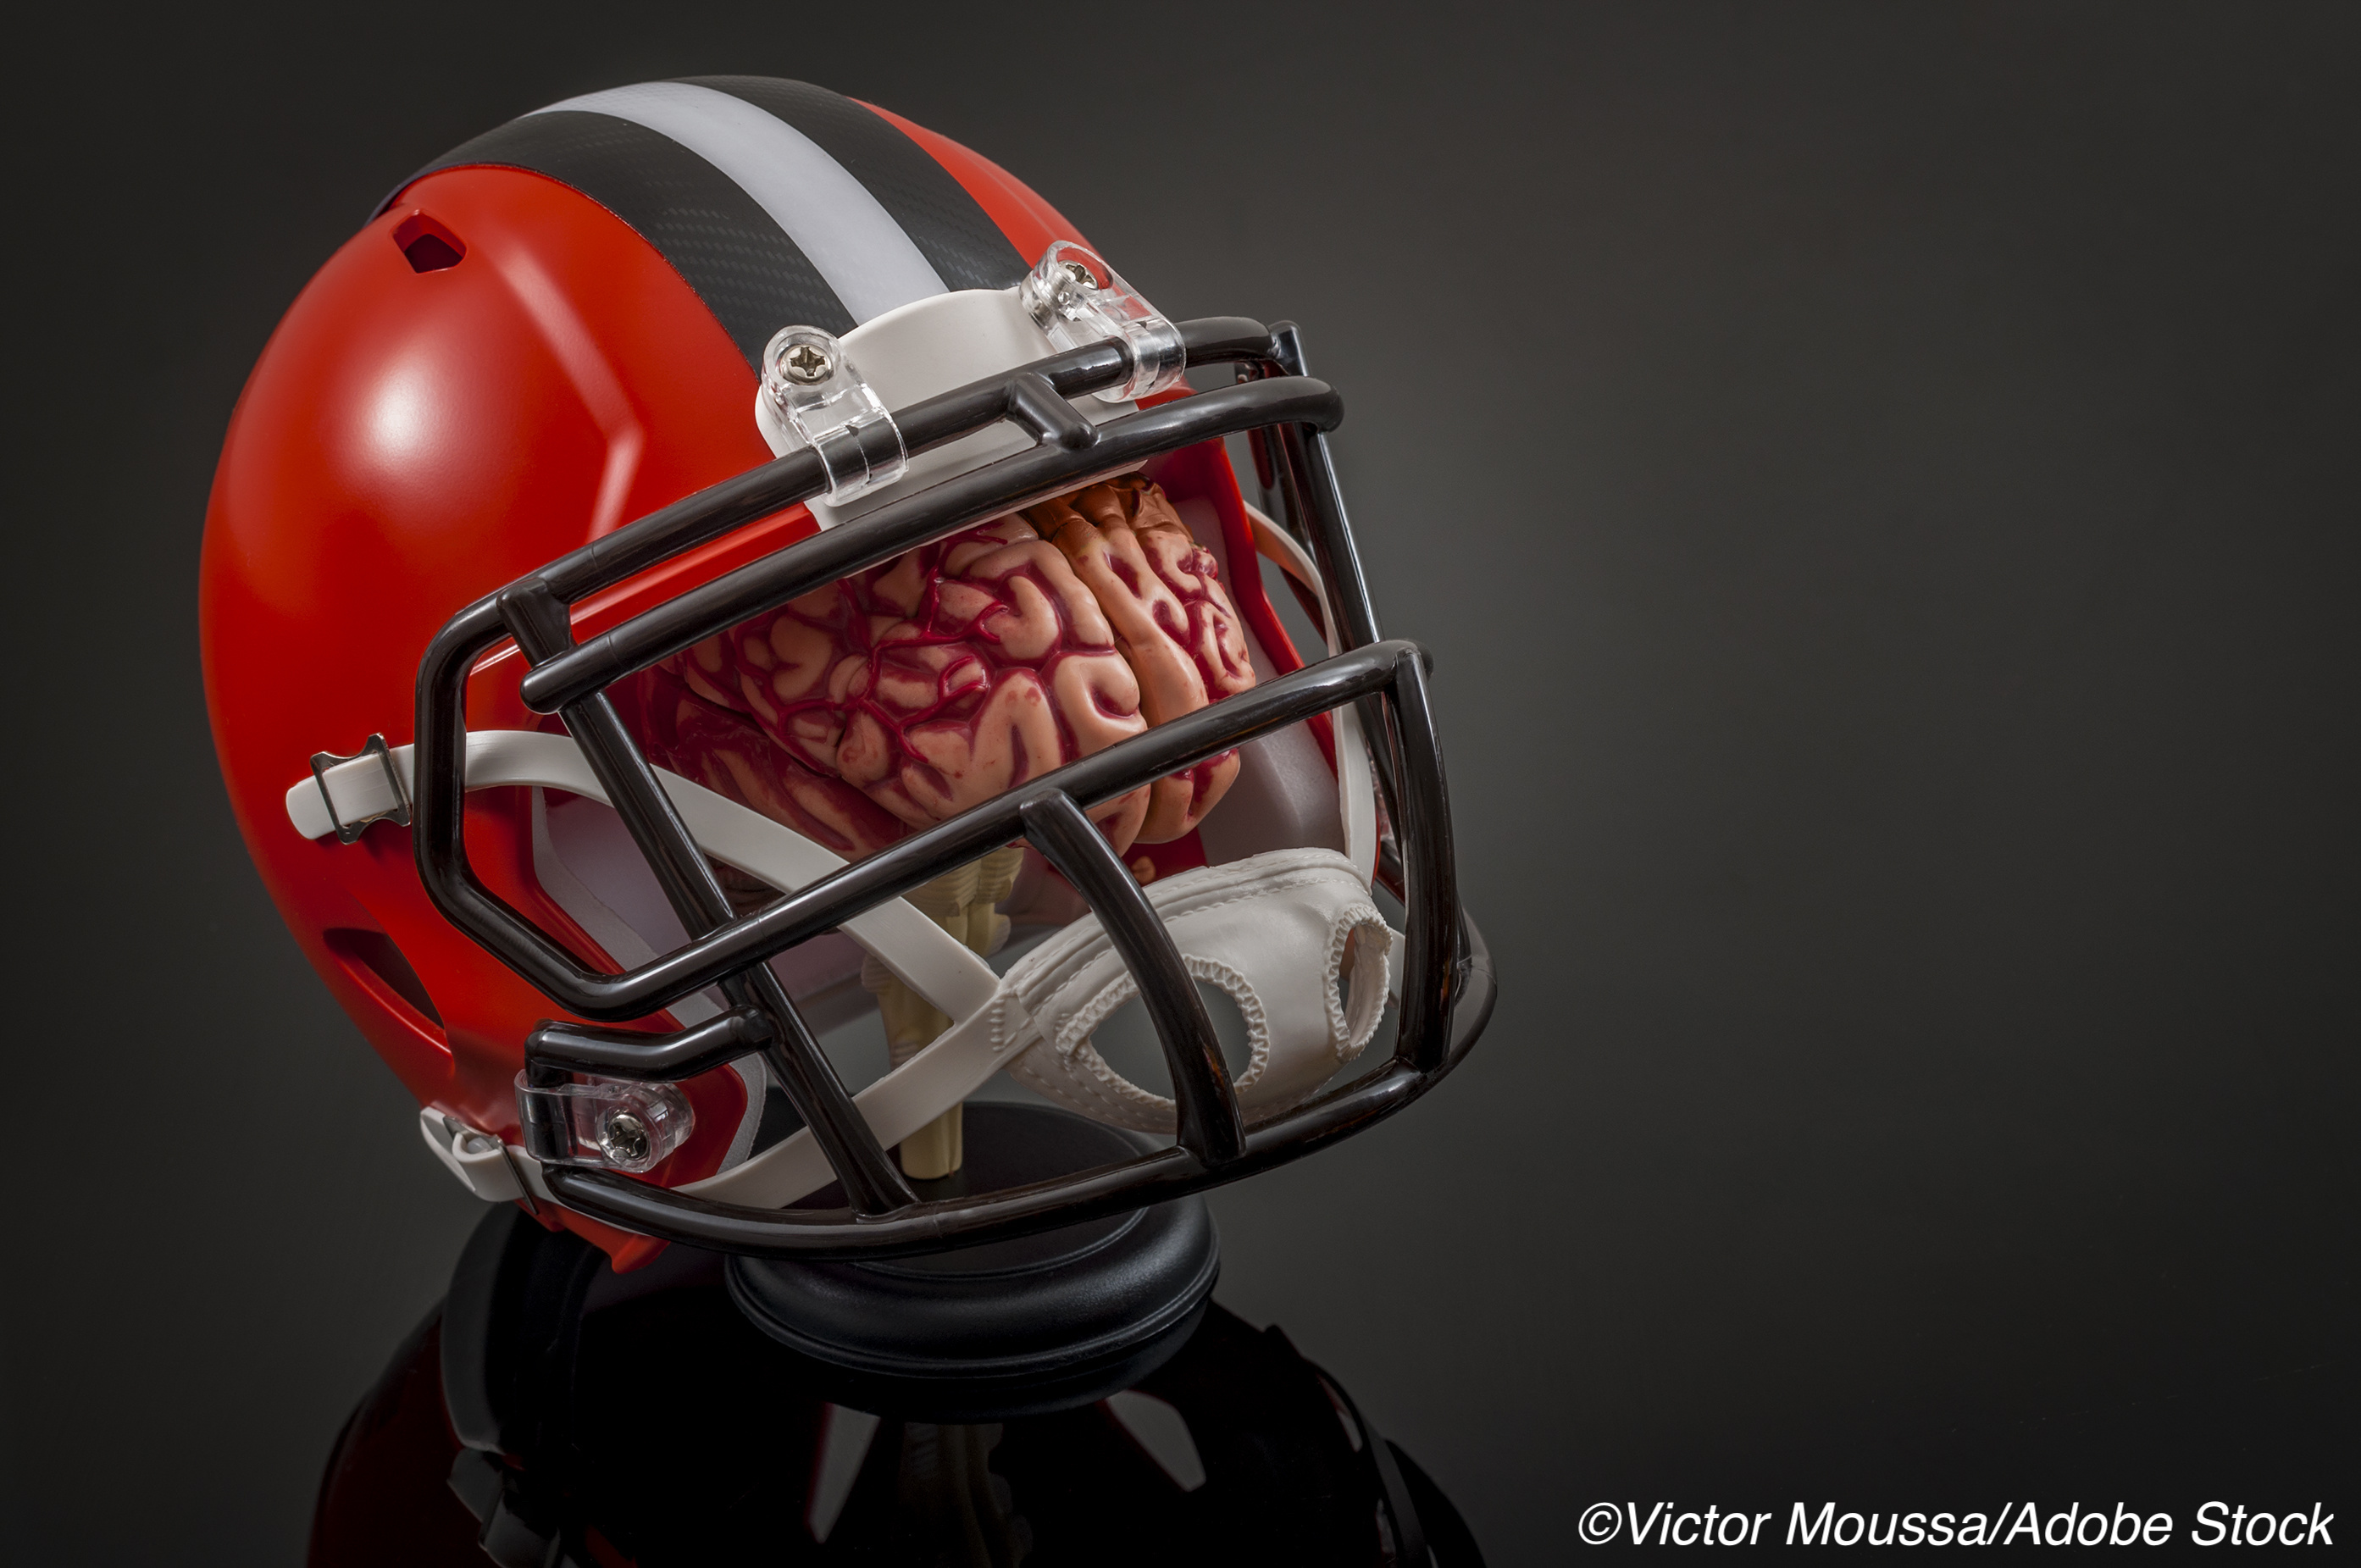 Exposure to Football from Childhood Onward Not Related to Short-Term Concussion Recovery